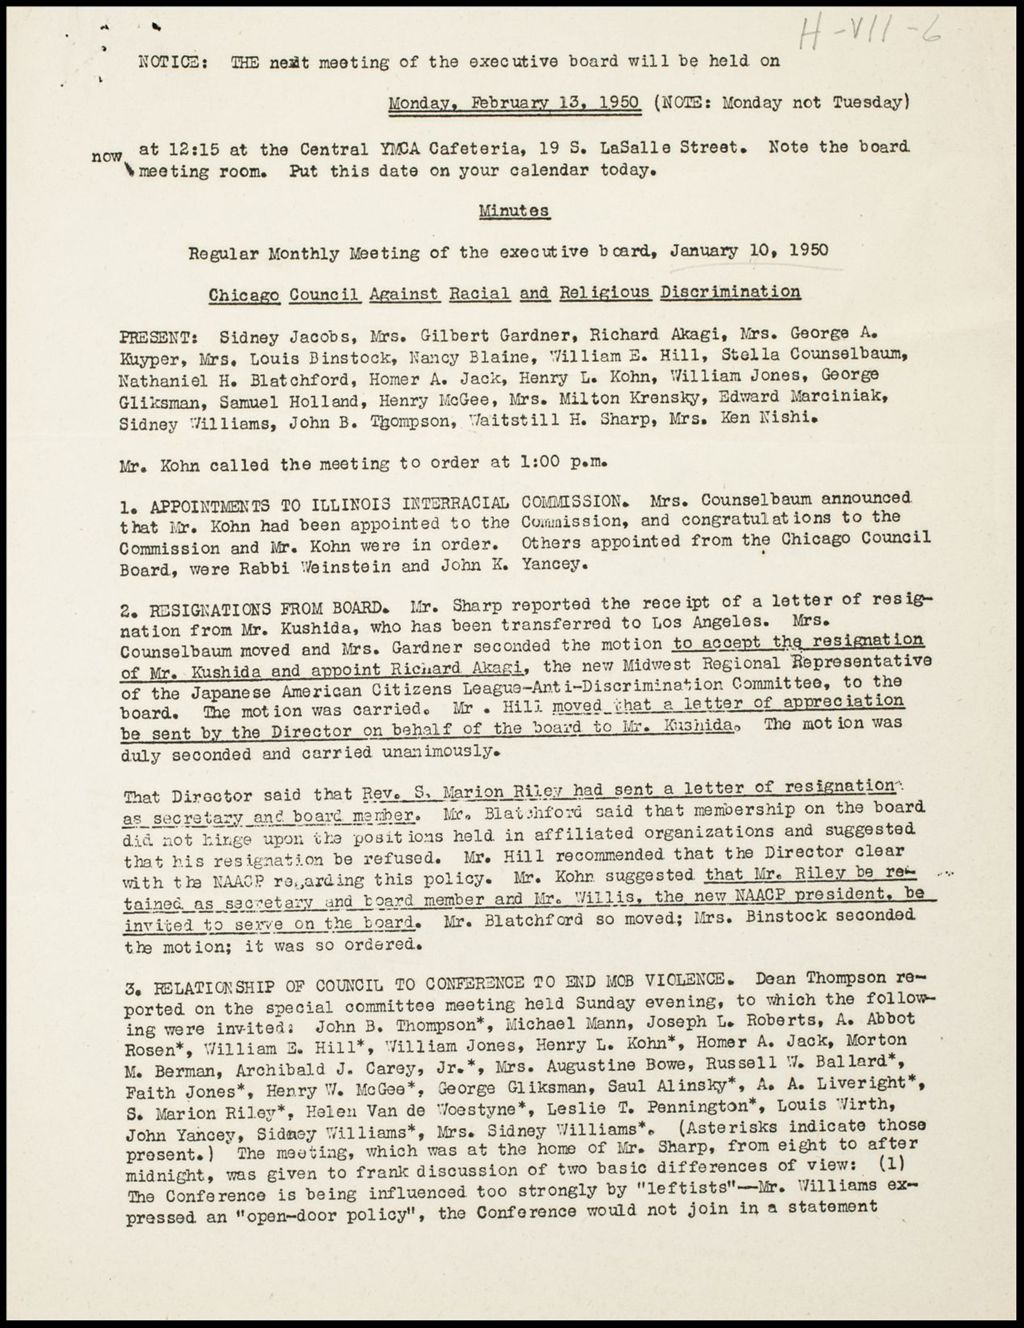 Miniature of Human Relations Department - Chicago Council Against Racial and Religious Discrimination, 1950 (Folder I-2633)